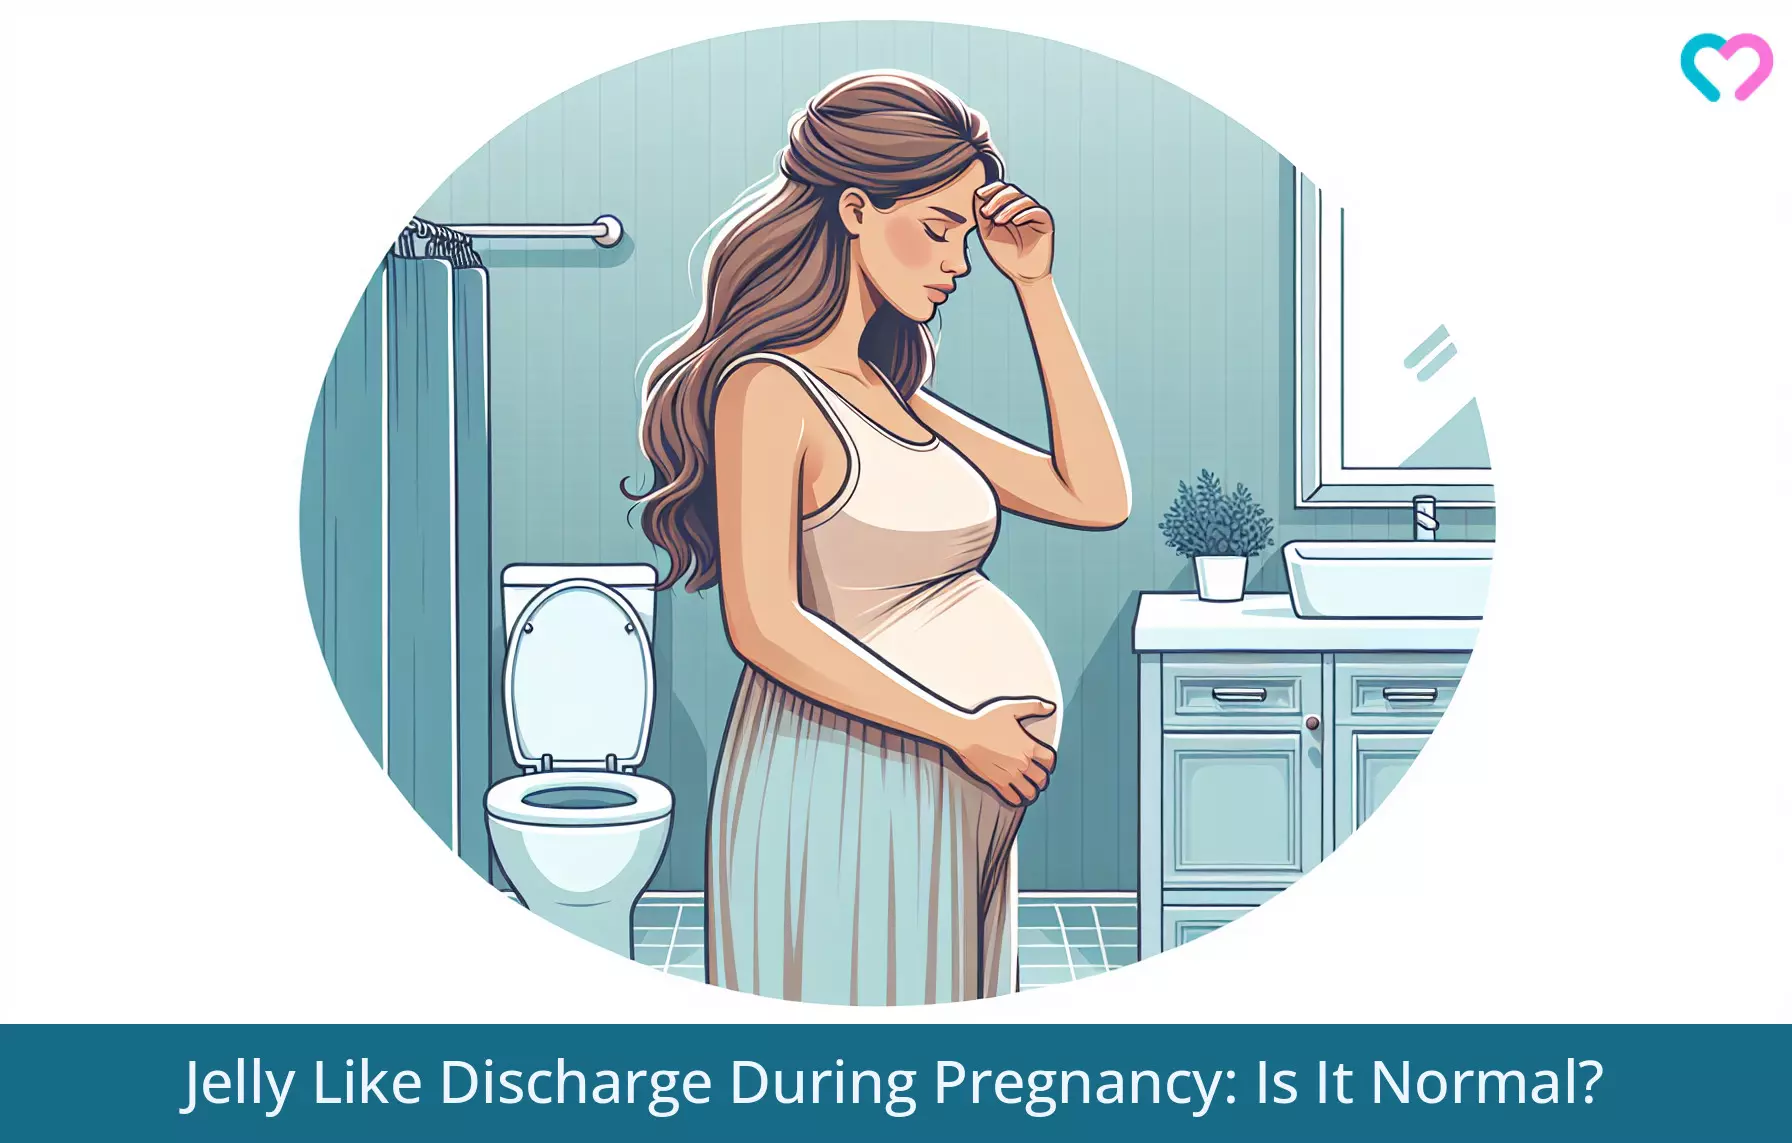 Jelly-Like Discharge During Pregnancy_illustration